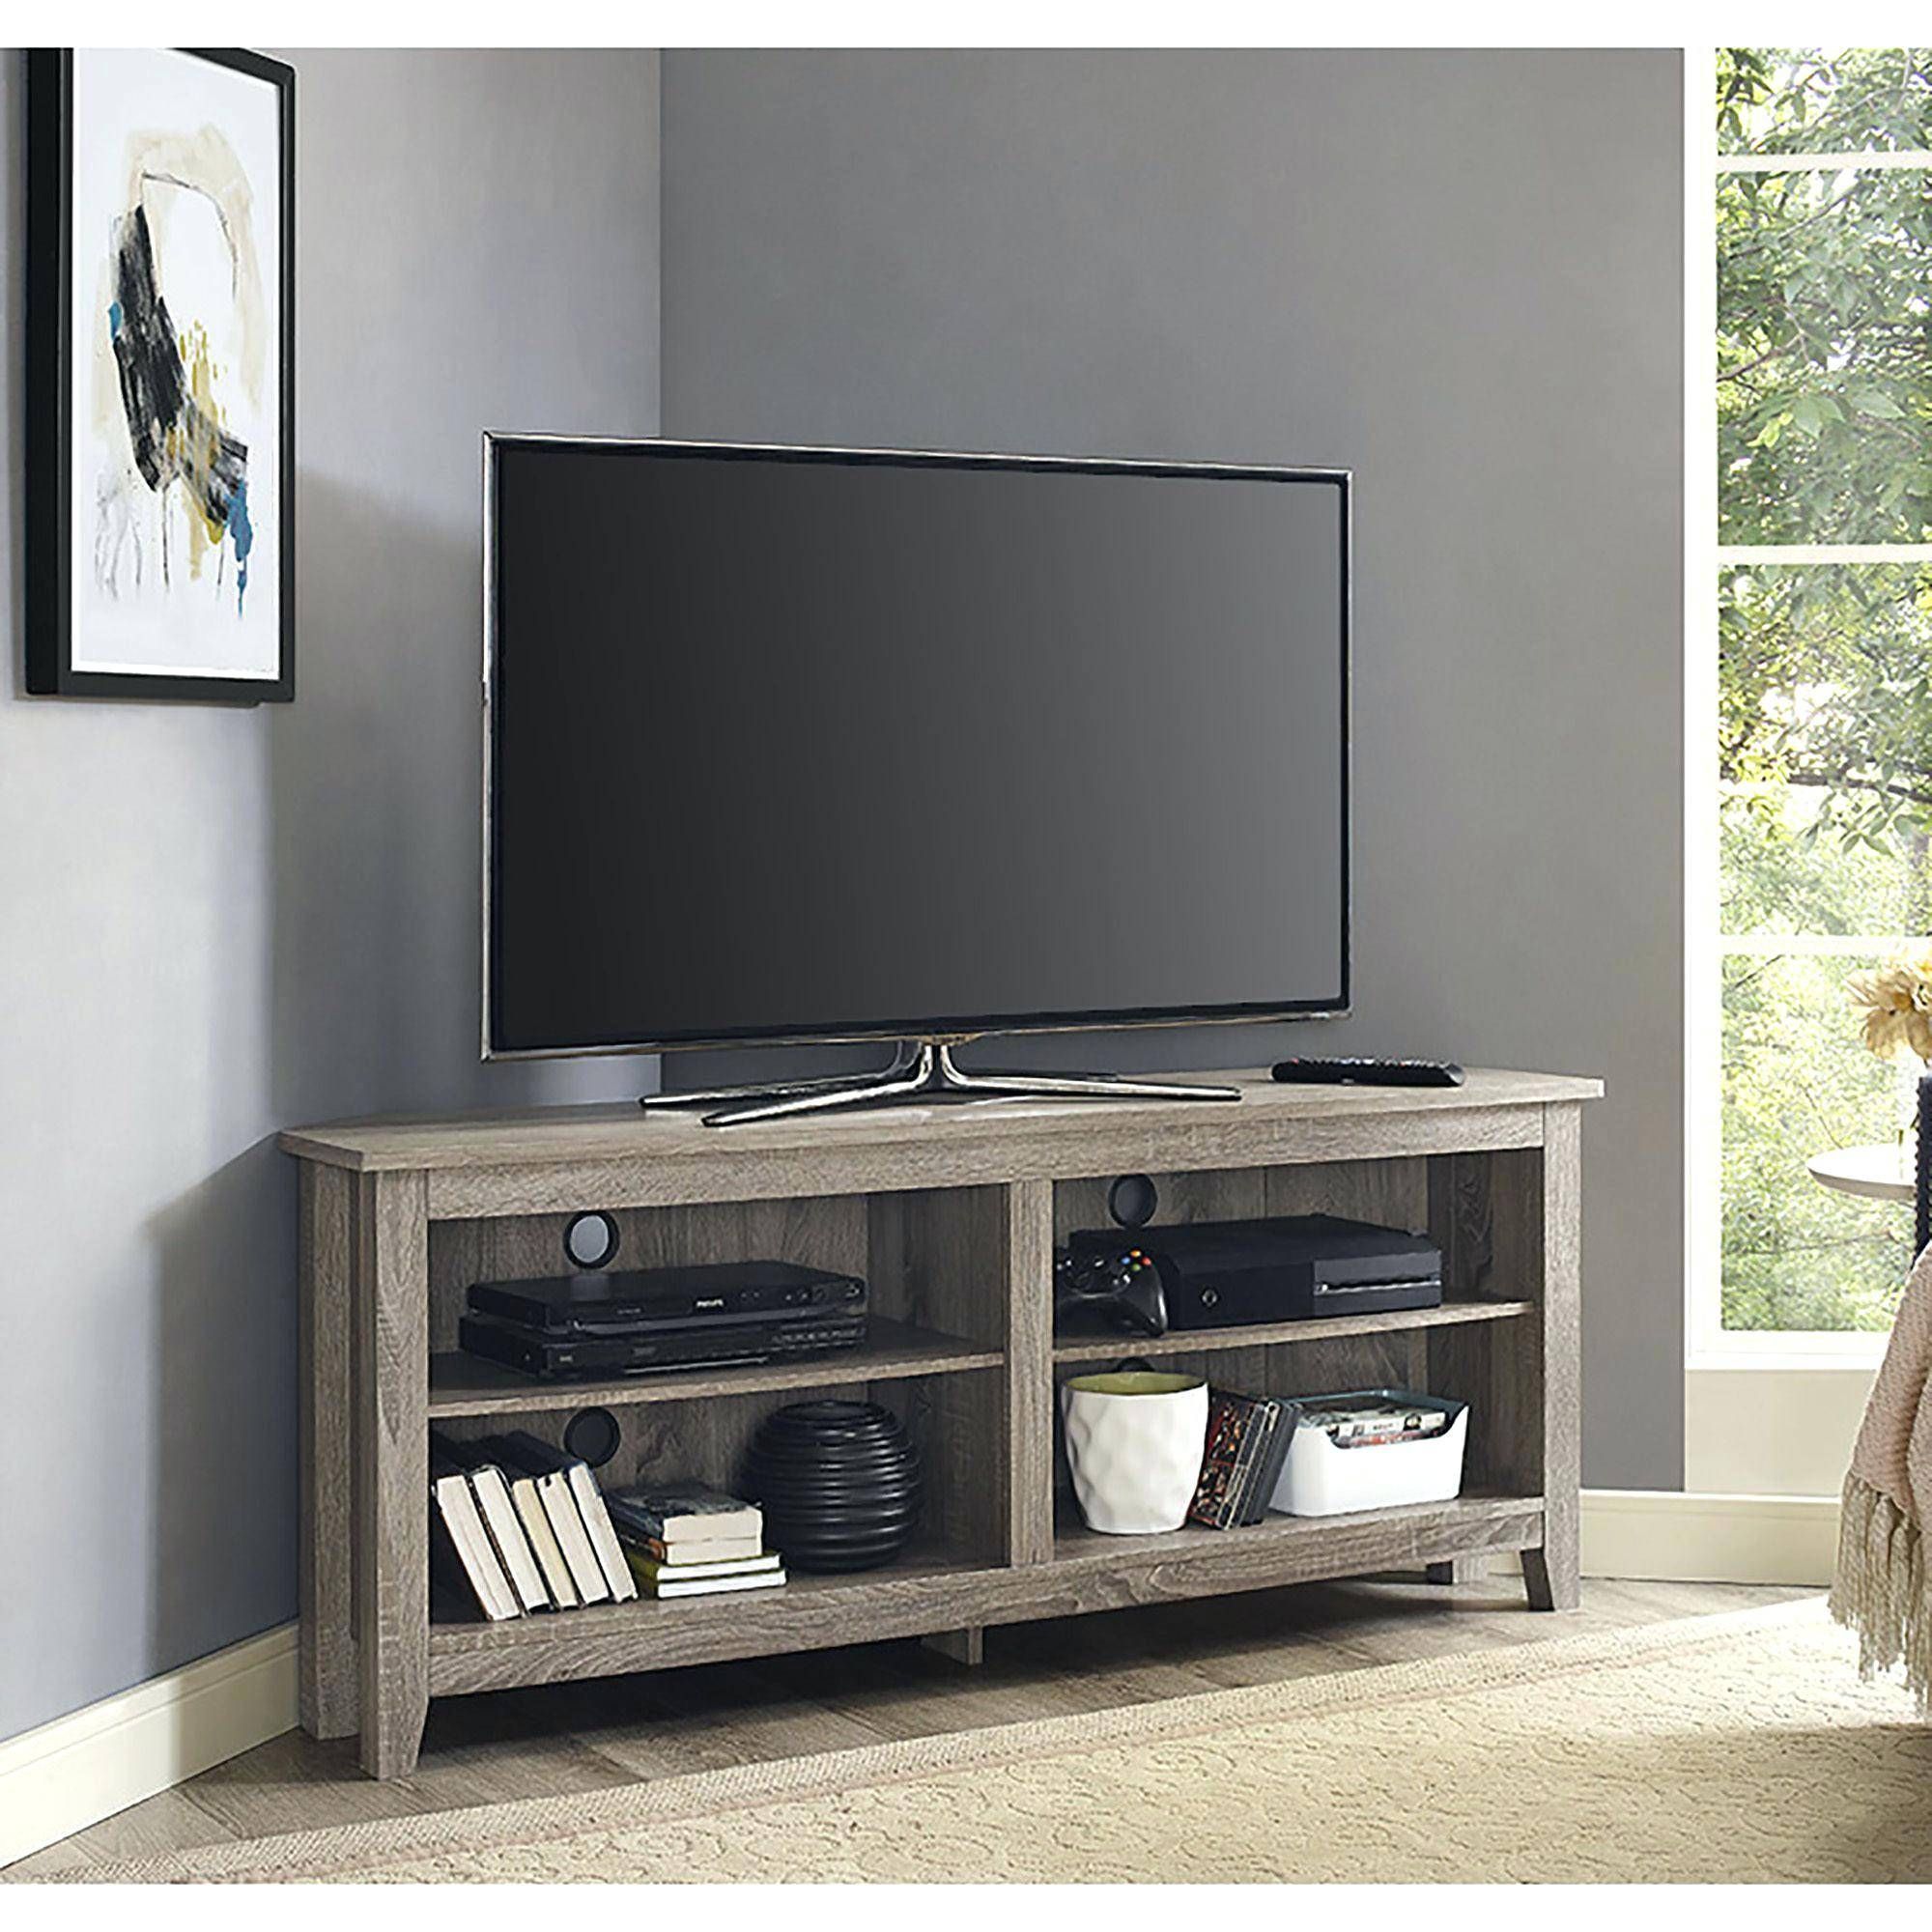 Tv Stand : Full Image For 40 Wide Tv Stand Mark Harris Roma Oak With Regard To Tv Stands 40 Inches Wide (View 4 of 15)